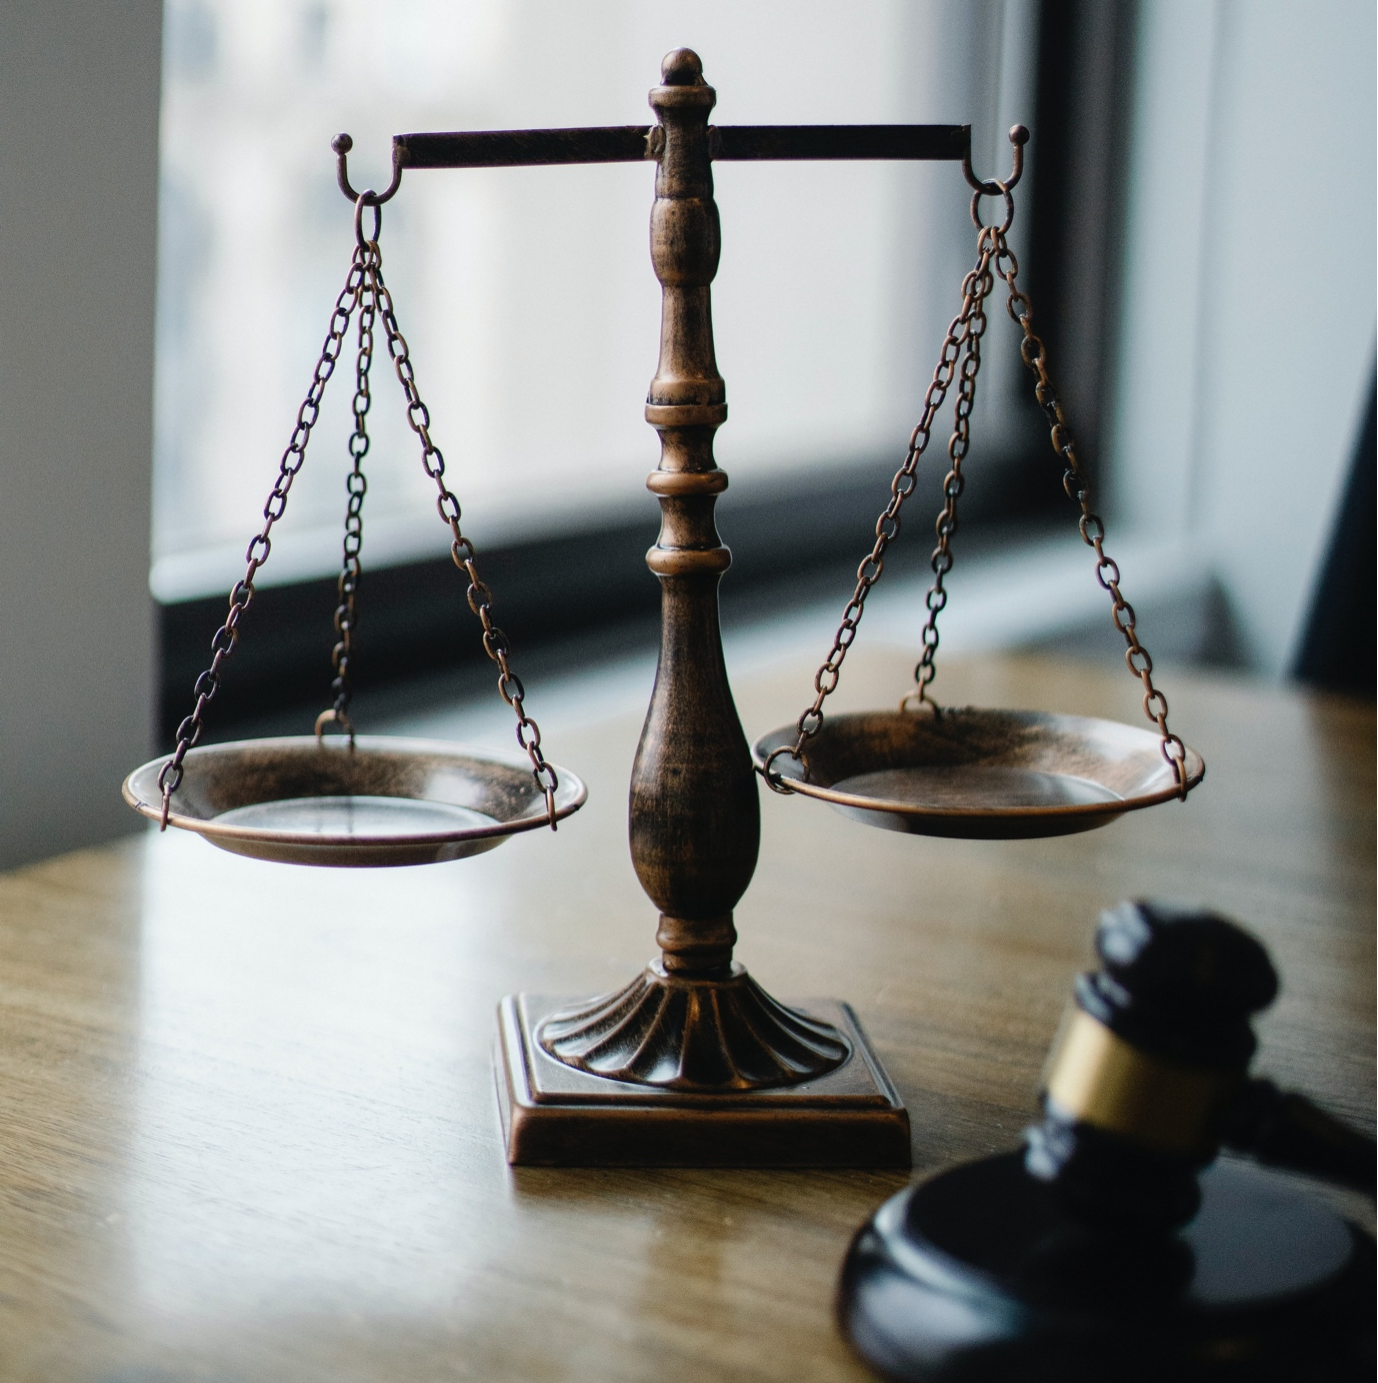 A legal scale and a judge's gavel on a wooden table